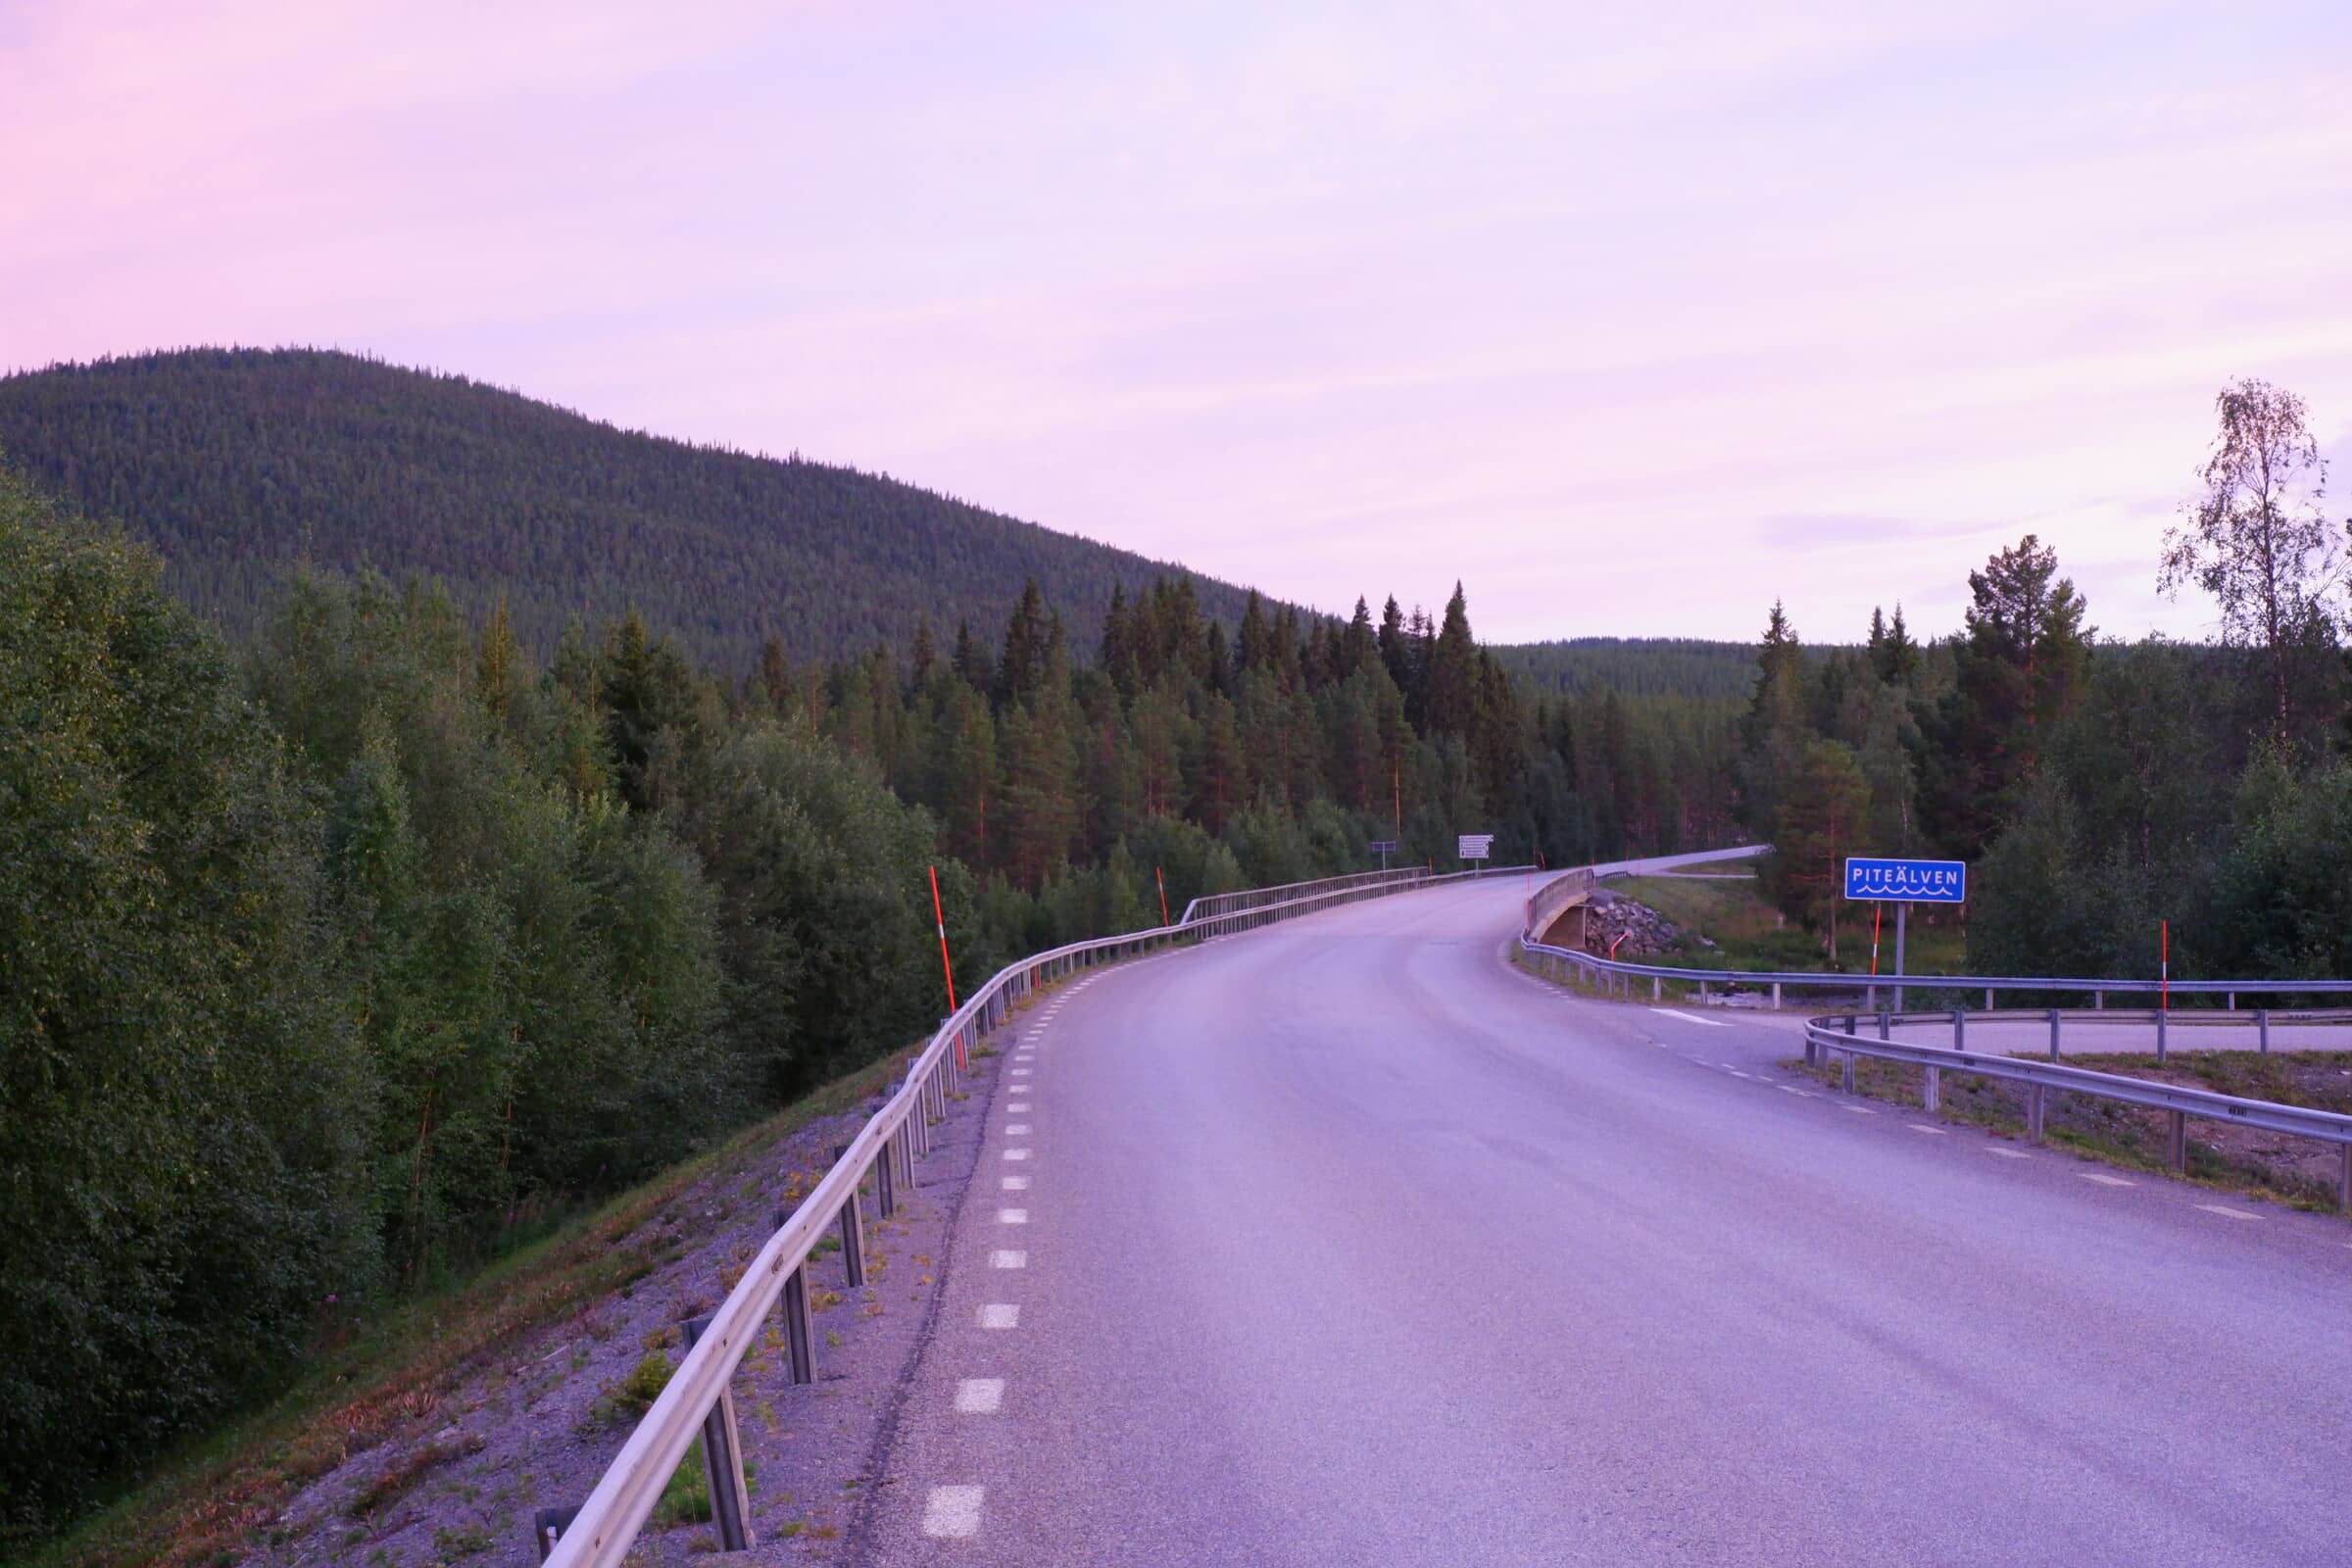 The road down to Piteälven. Sky is purple, with forest on the sides of the road.